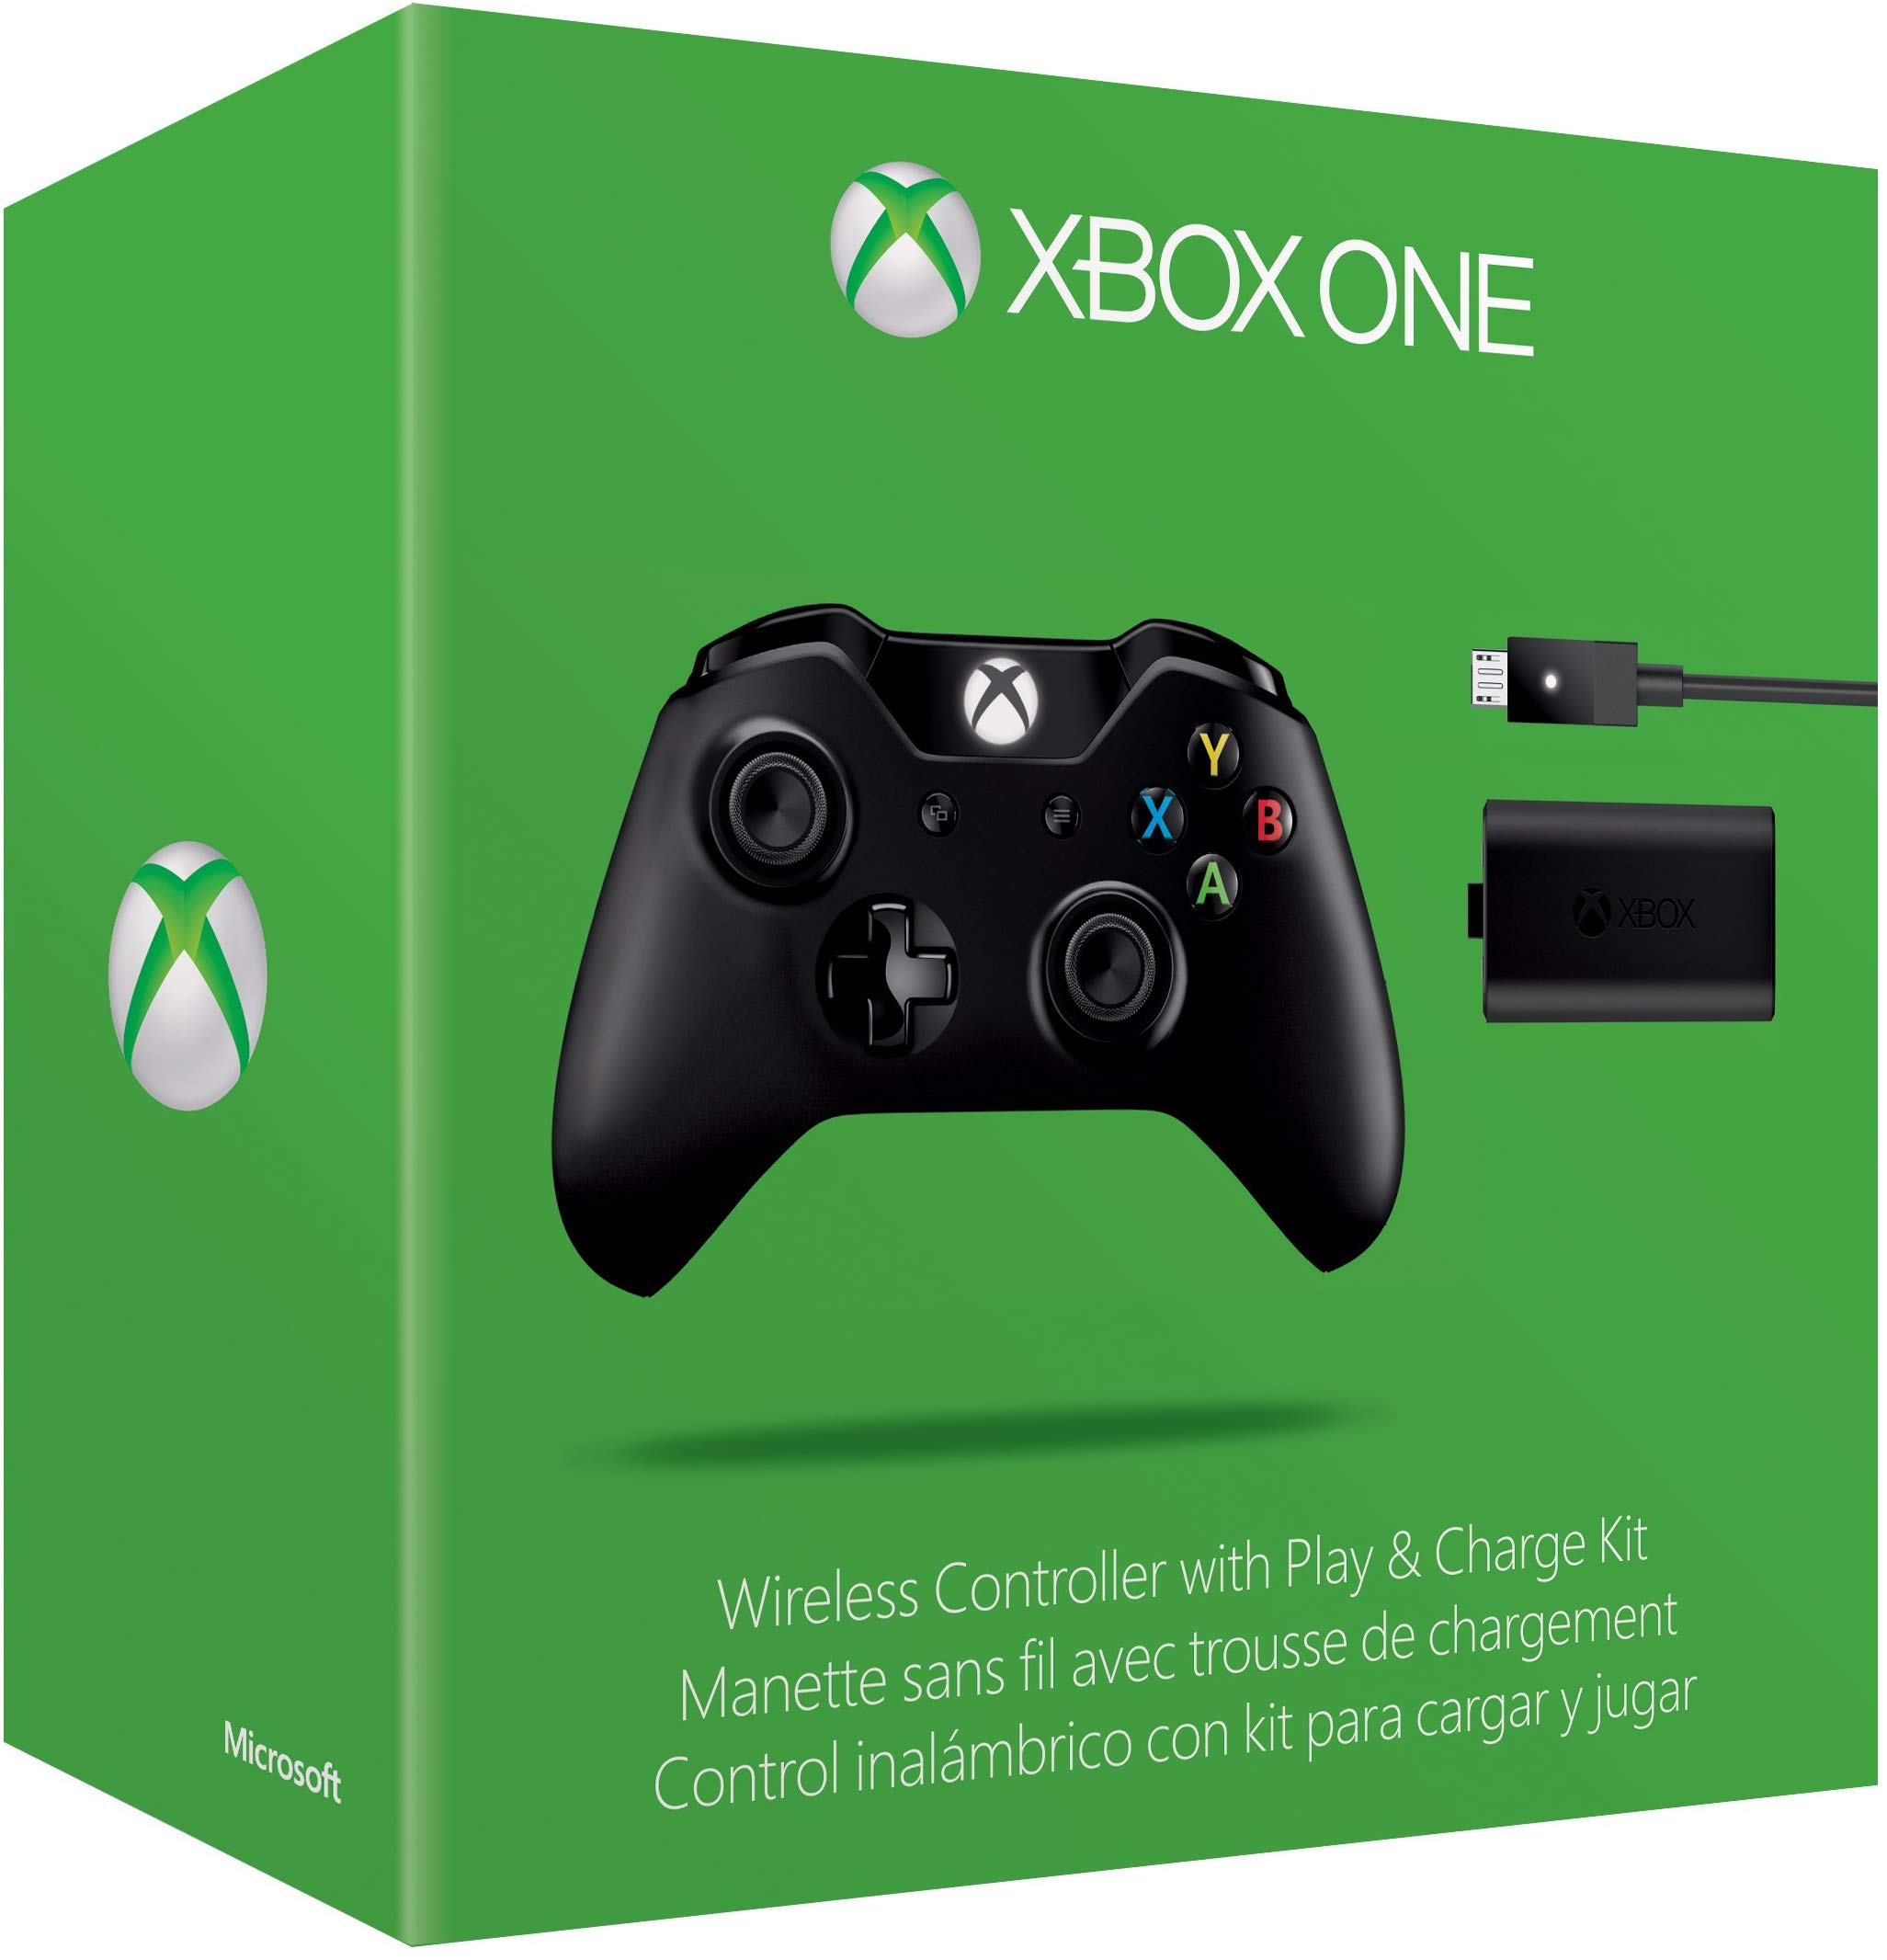 Xbox One Wireless Controller and Play & Charge Kit (Without 3.5 millimeter headset jack)